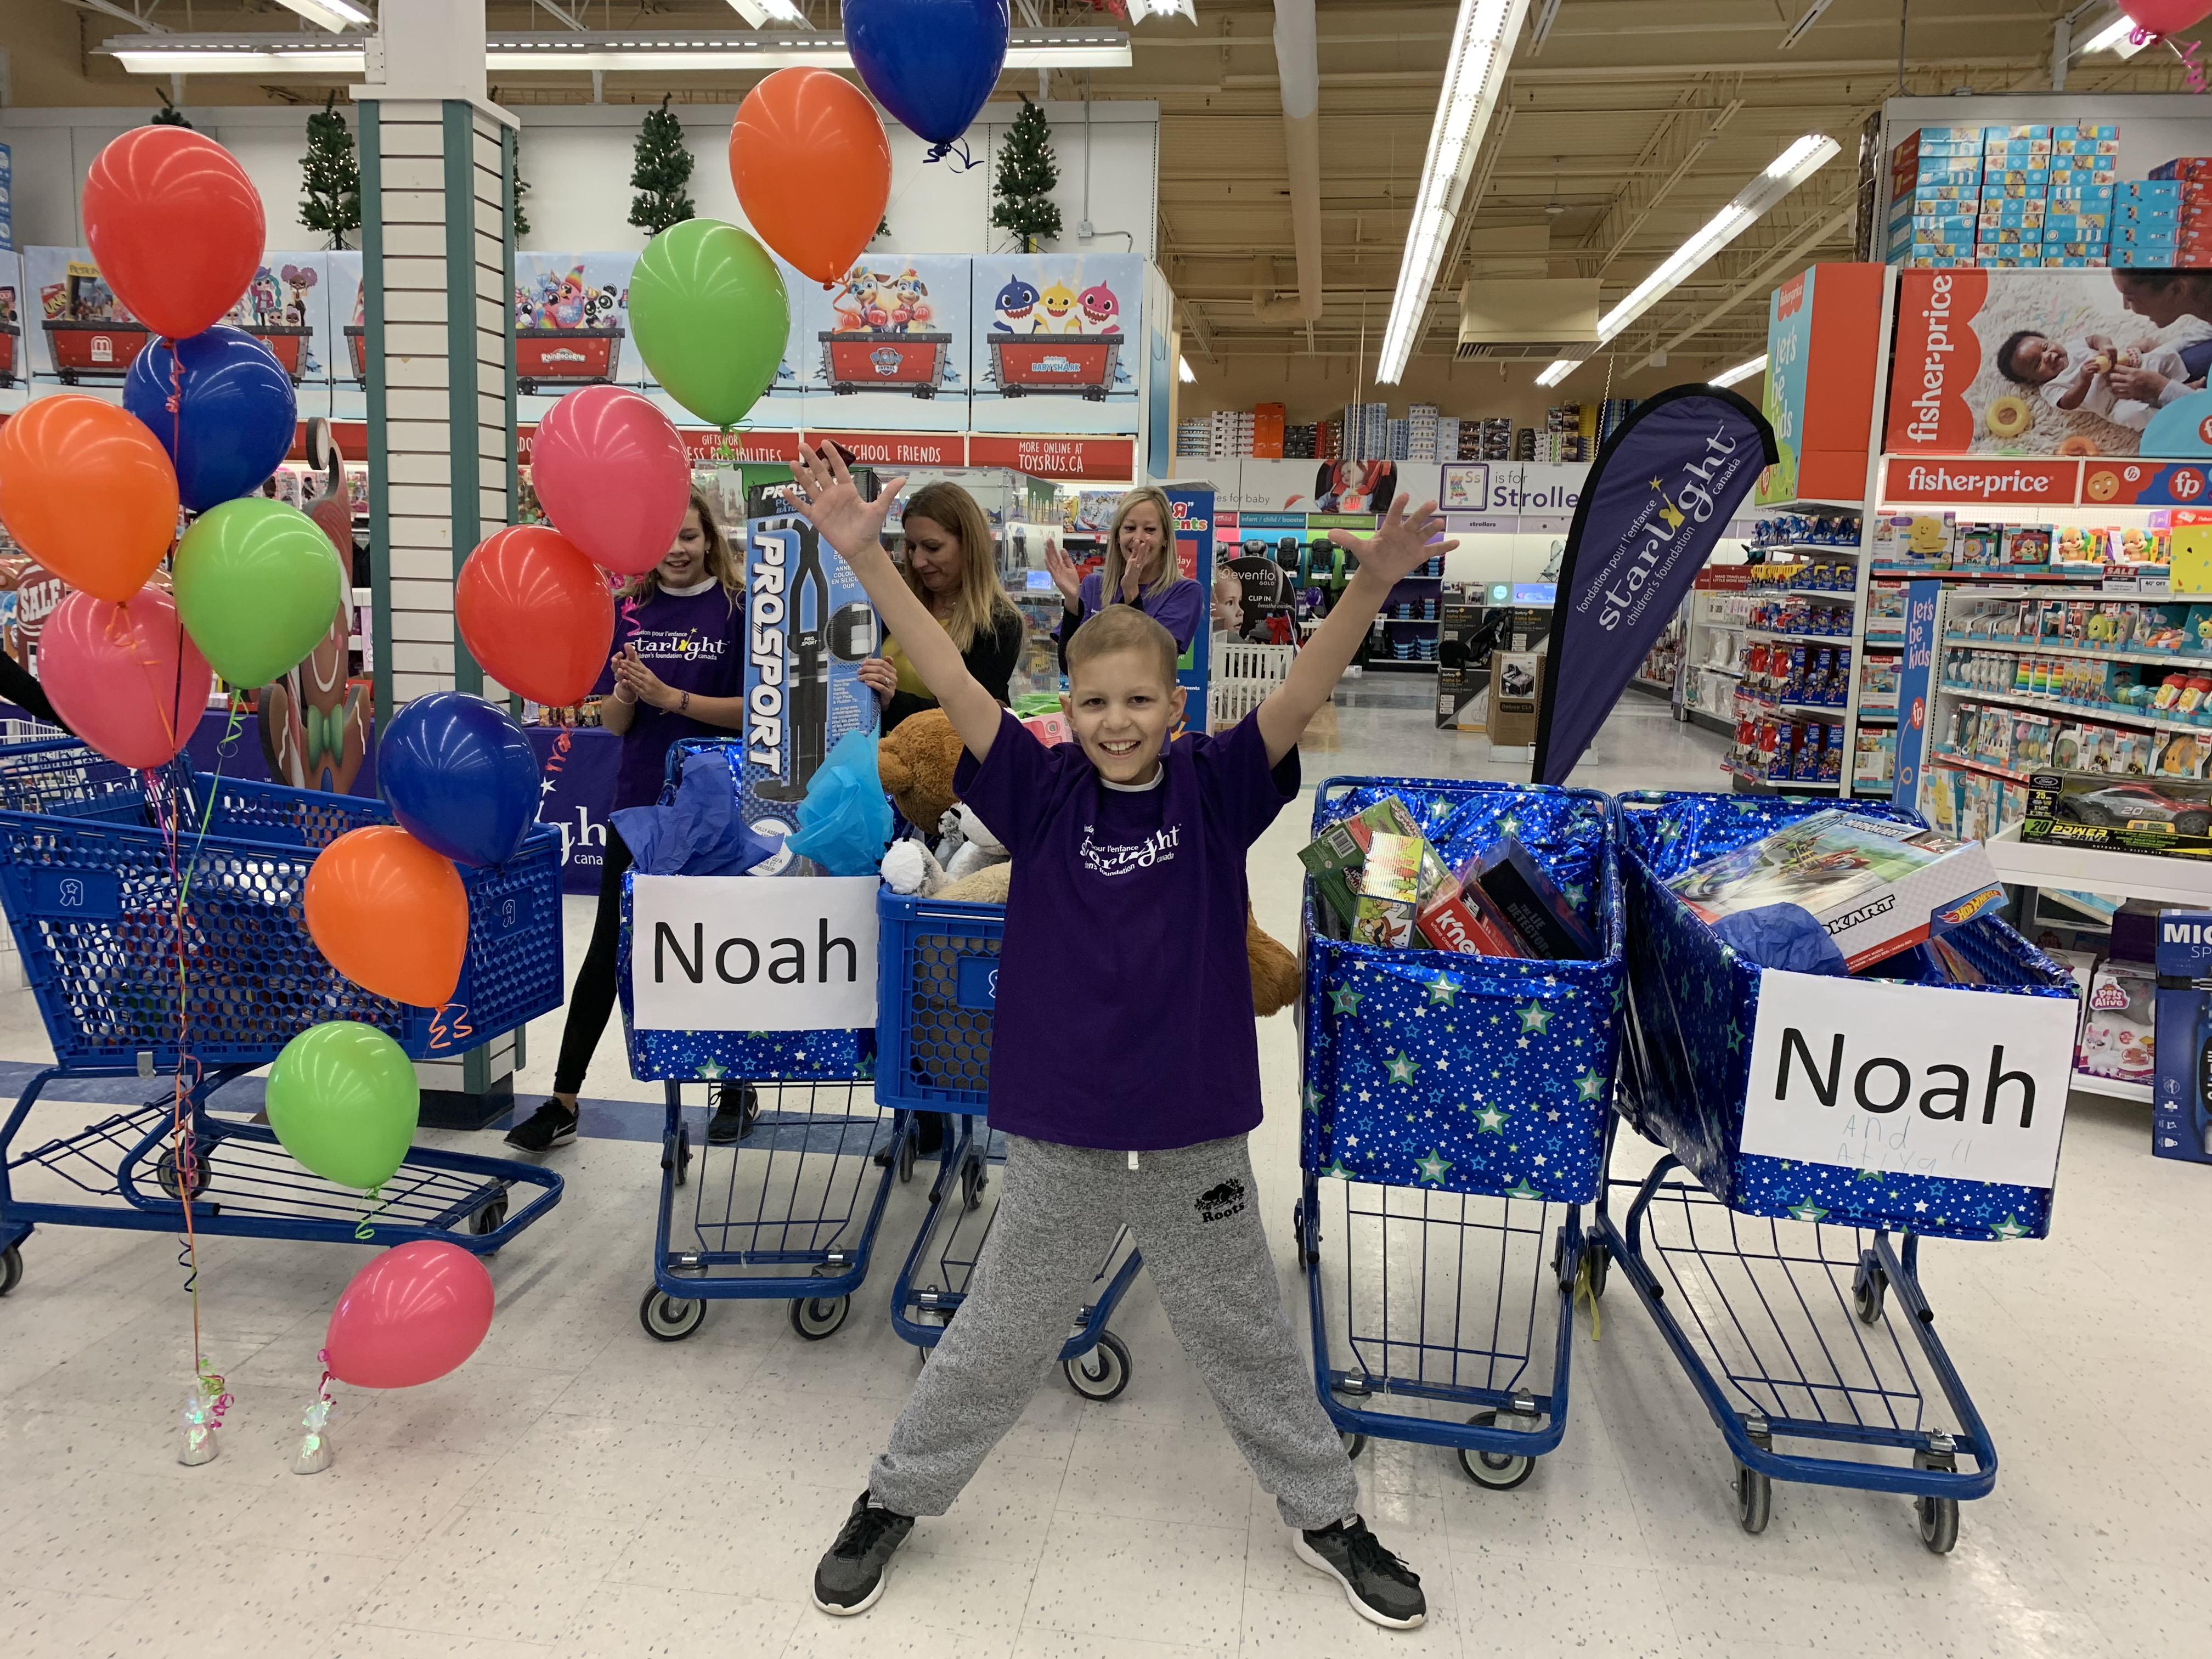 Toy shopping spree brightens day for Newmarket boy battling cancer (14 photos) - NewmarketToday.ca